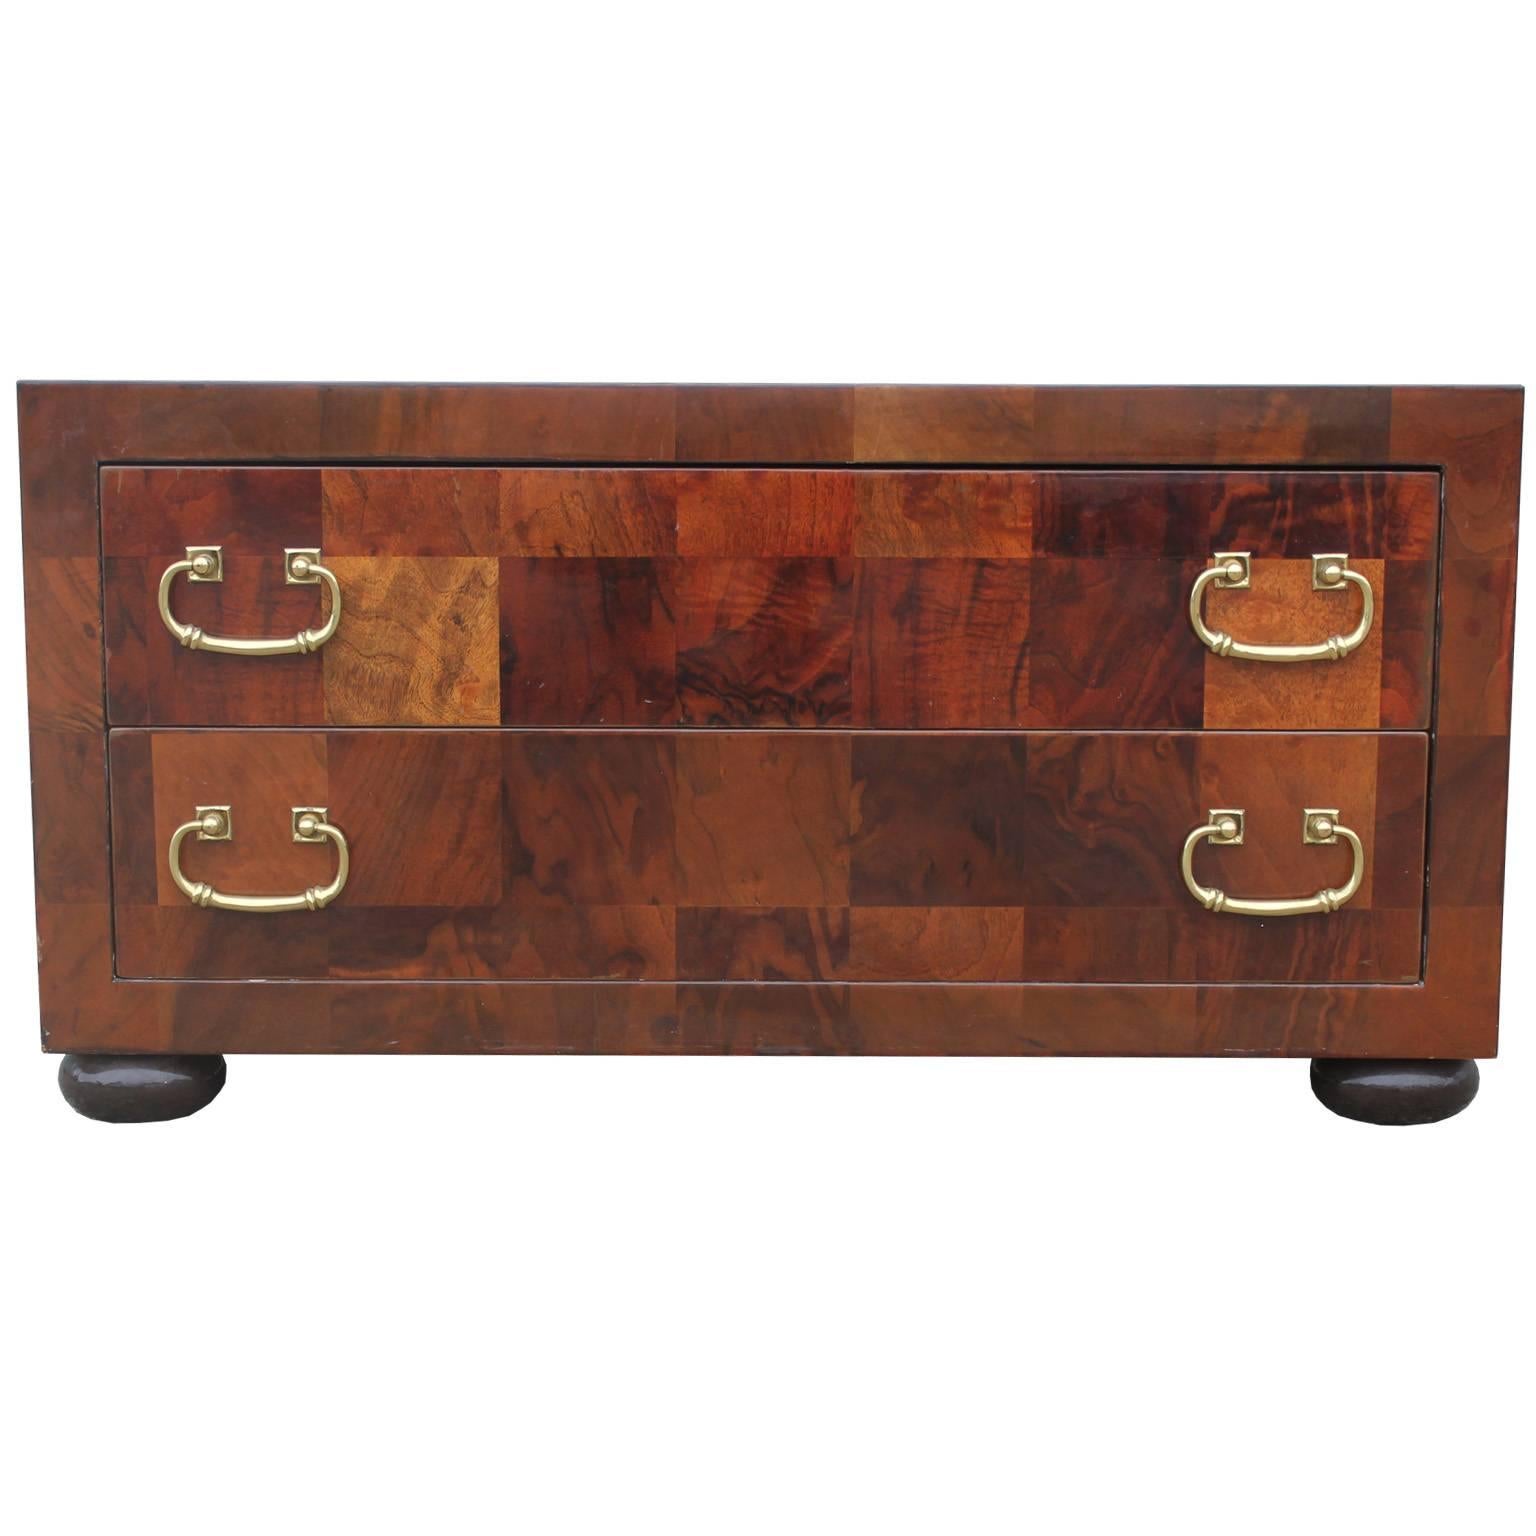 Wonderful two-drawer chest with brass hardware. Chest has a gorgeous parquetry veneer featuring checkers of various tones. Stunning in person. Chest would look beautiful in a Hollywood Regency or transitional interior.